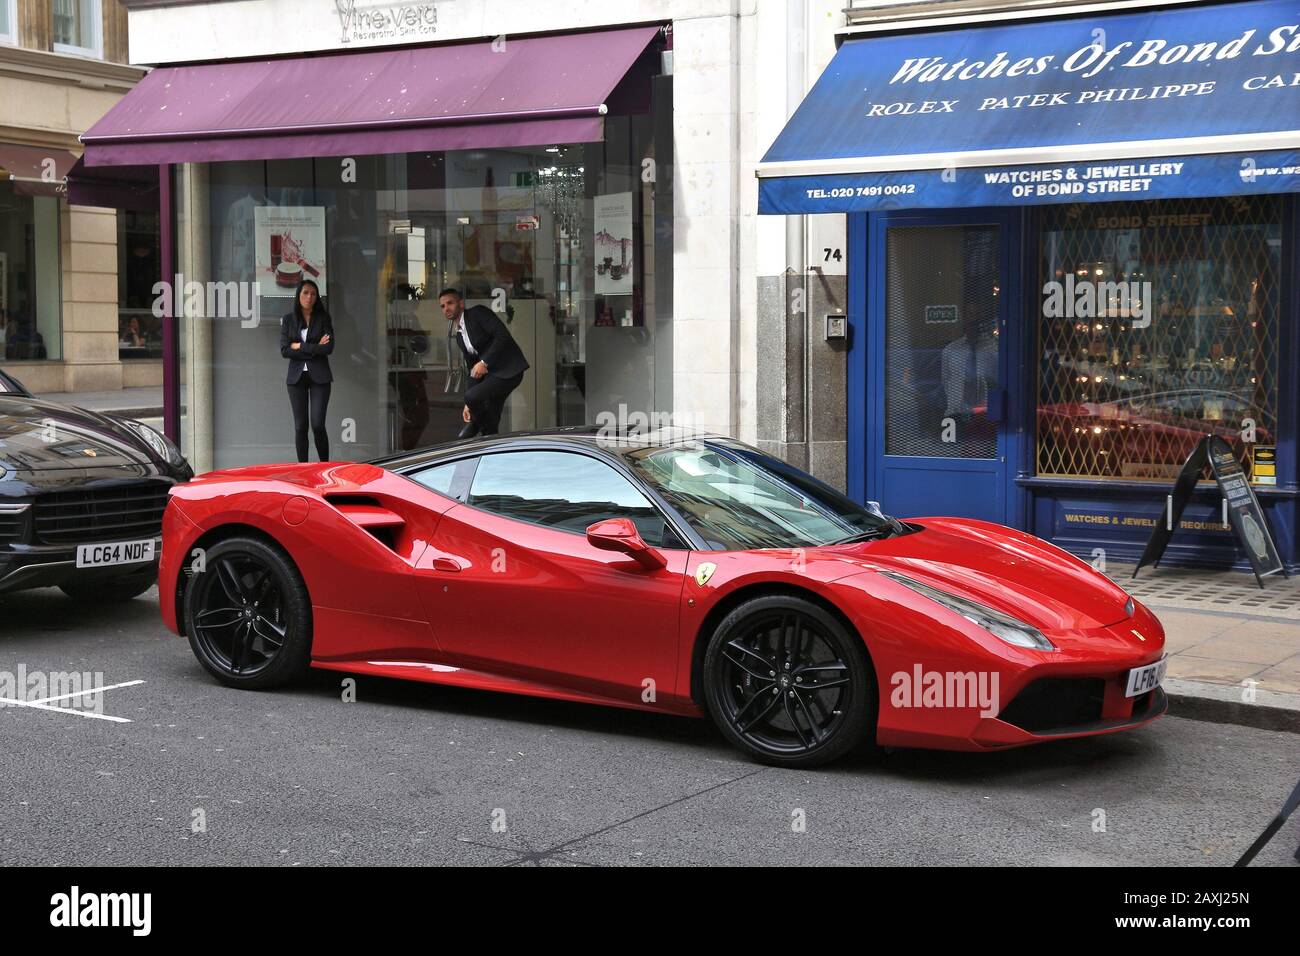 LONDON, UK - JULY 7, 2016: People look at Ferrari sports car parked at Bond Street in London. Bond Street is a major shopping street in the West End o Stock Photo